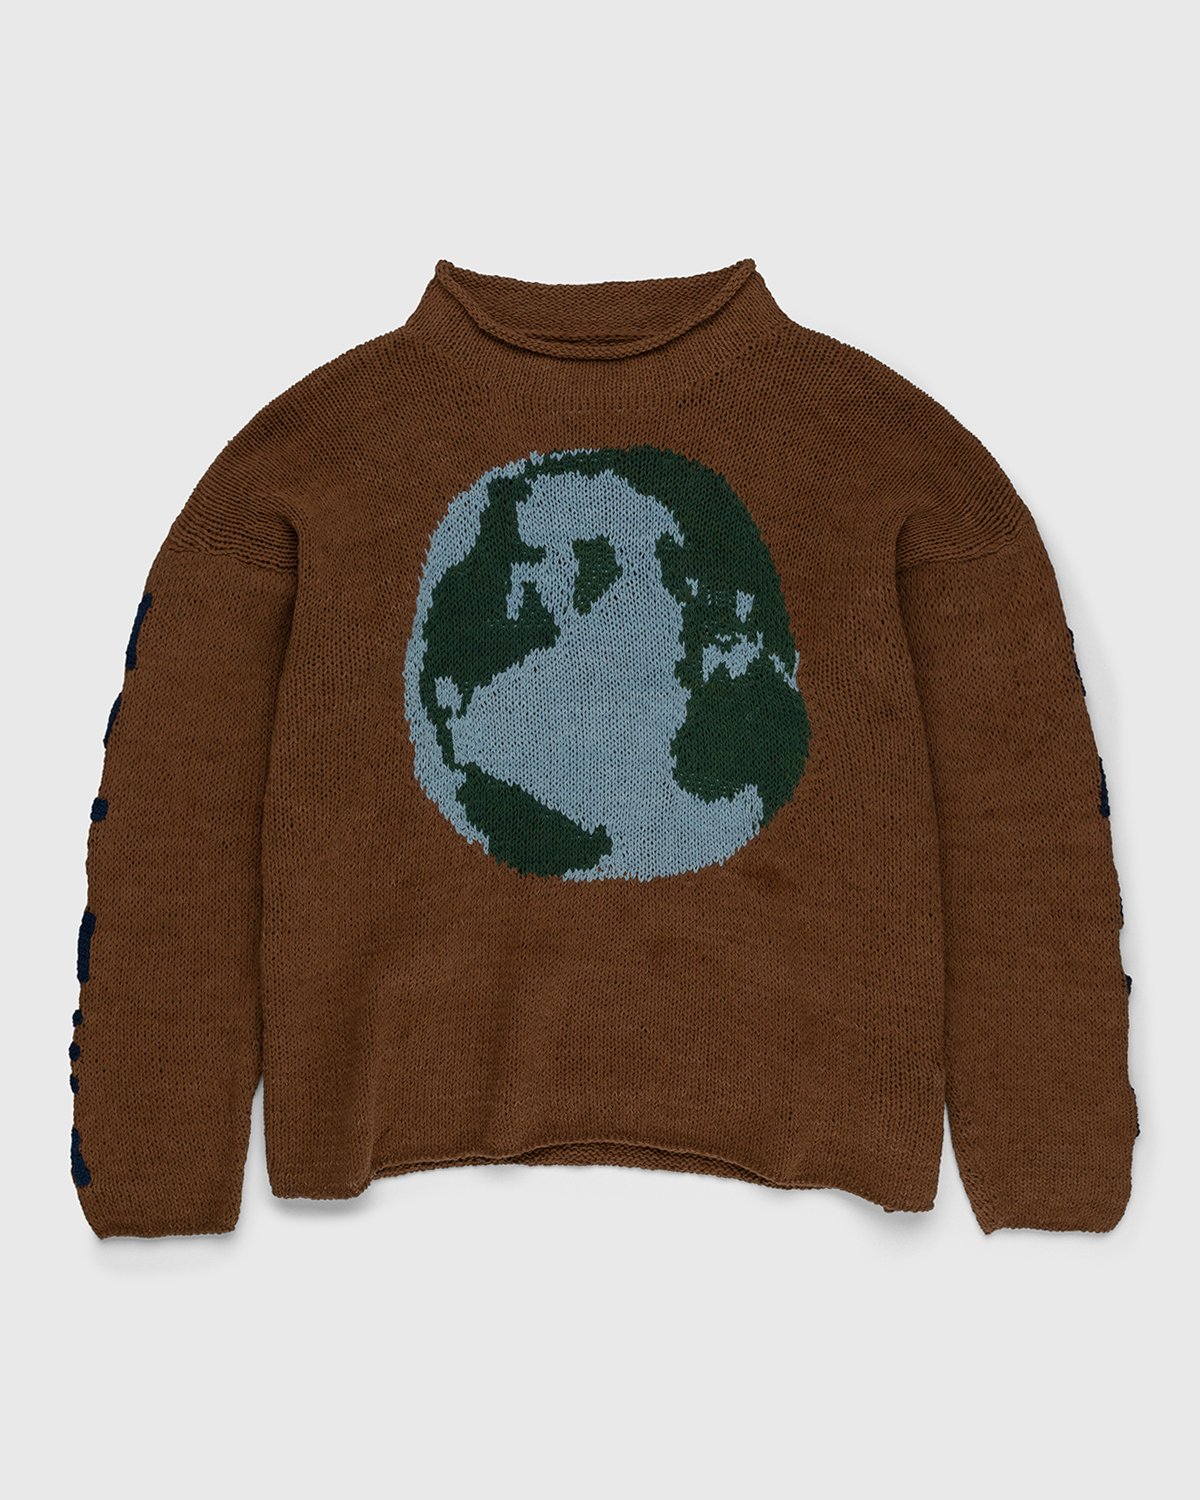 Story mfg. - Twinsun Rollneck Sweater Mother Earth Brown - Clothing - Brown - Image 1